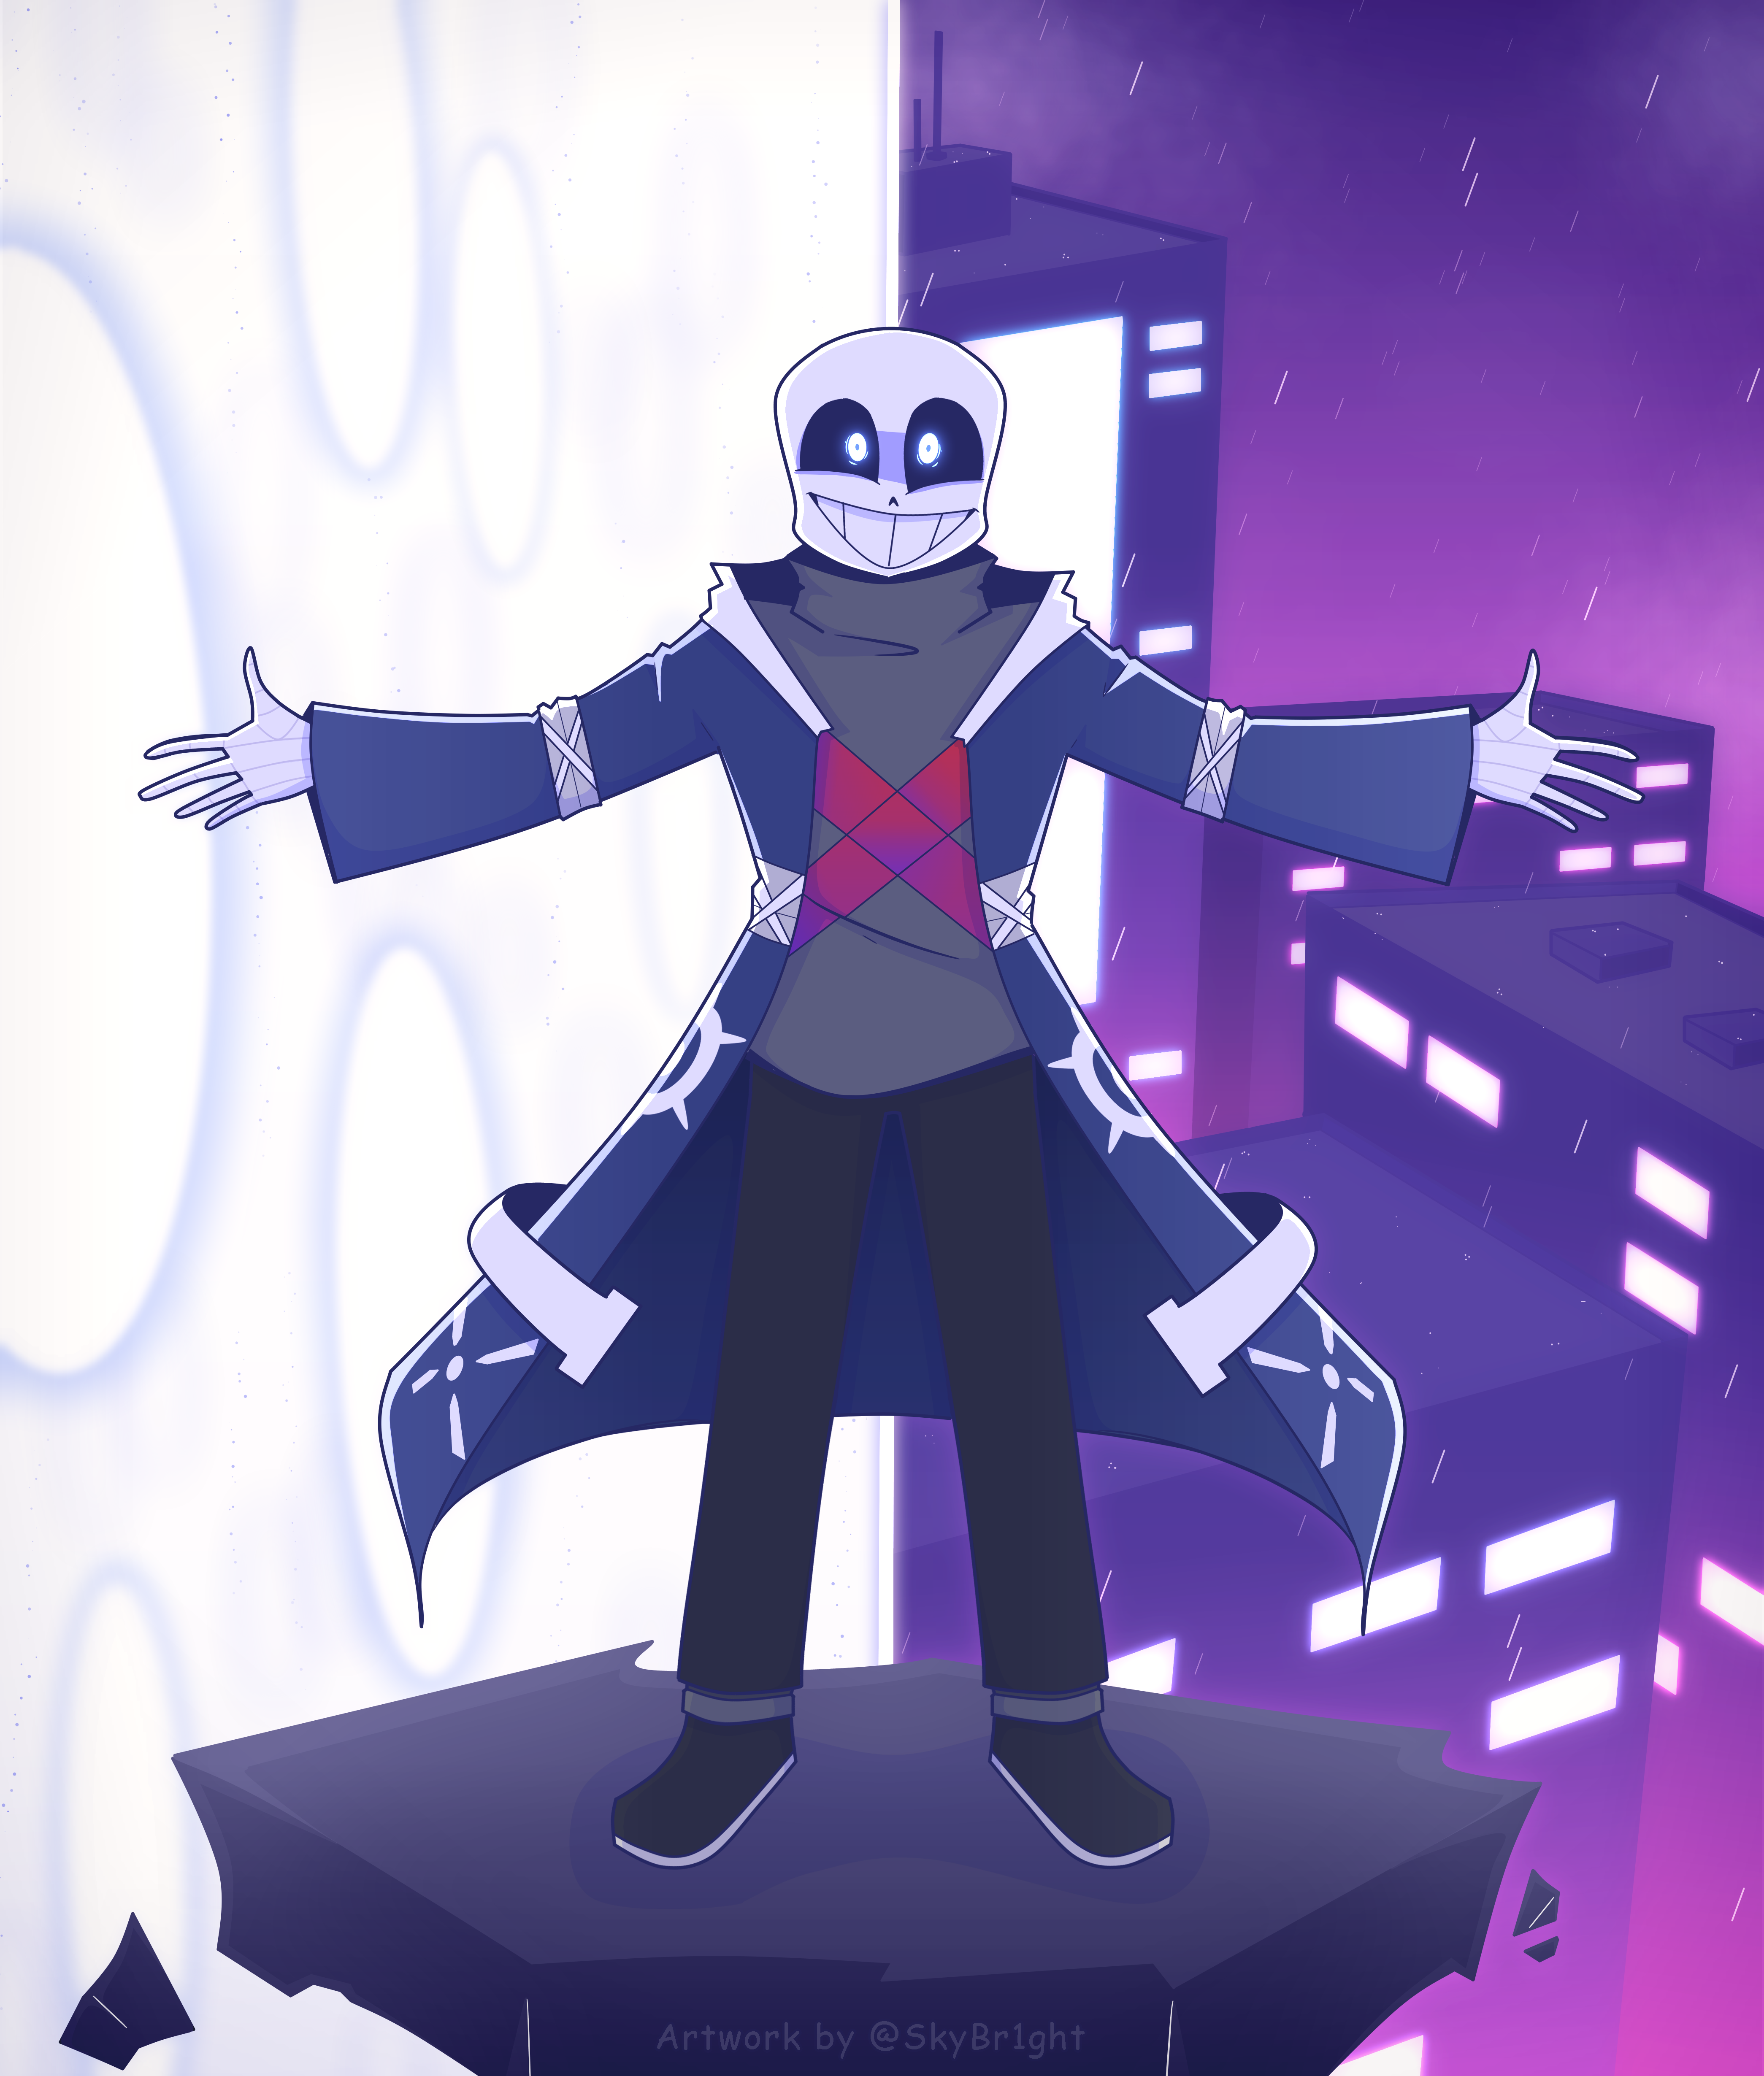 Would it be a stretch to assume this inspired the Sans fight intro